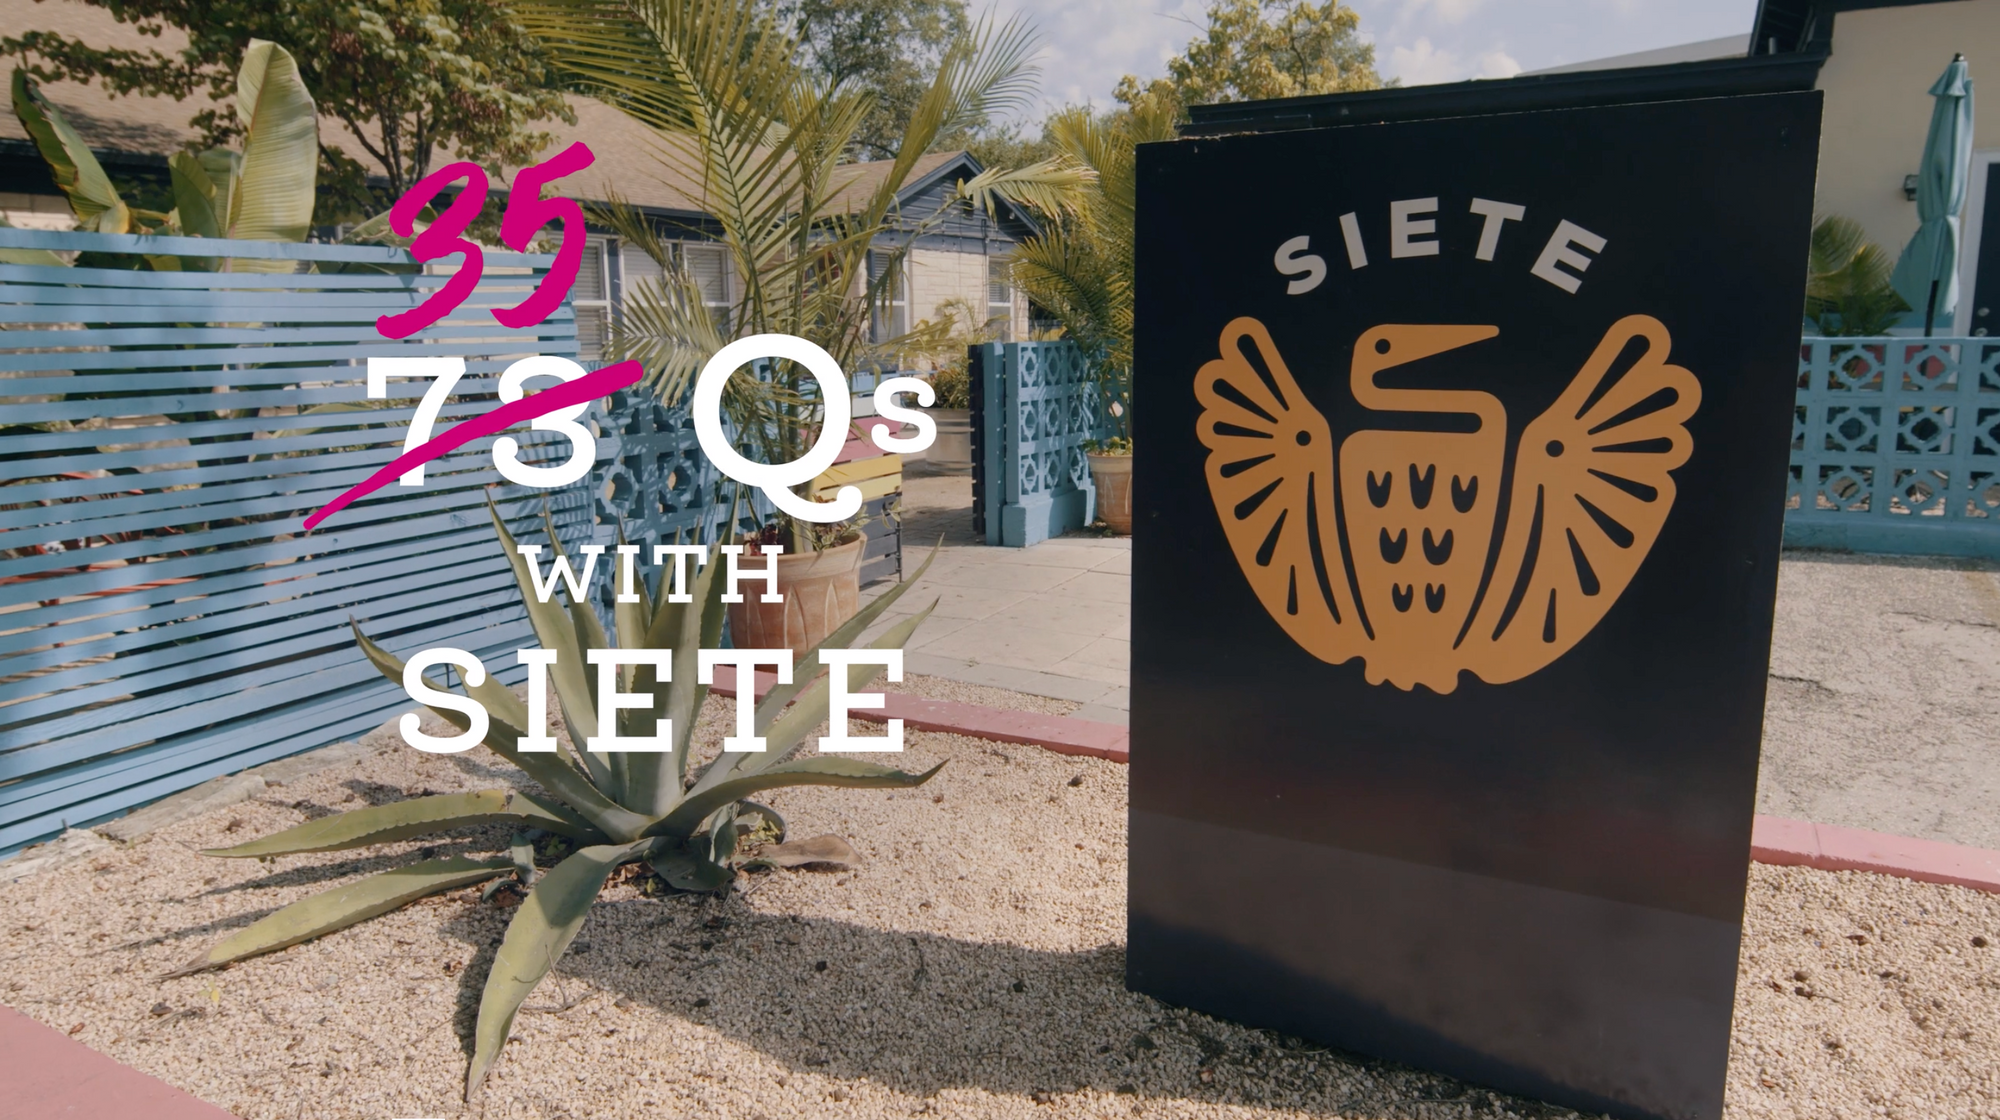 35 Questions with Siete